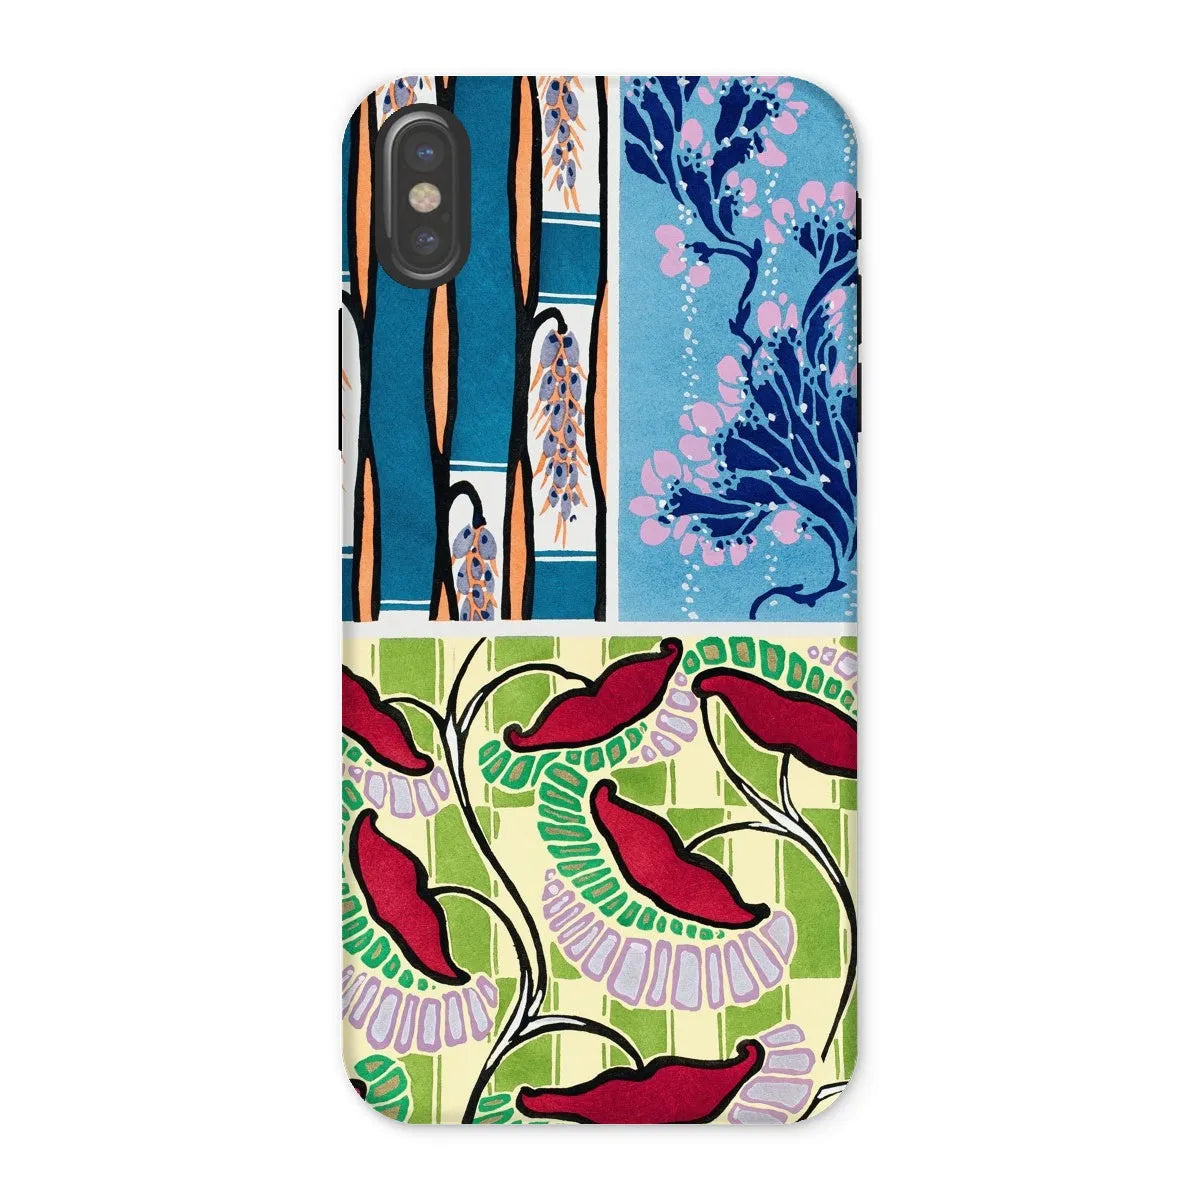 Floral Kitsch Aesthetic Art Phone Case - E.a. Séguy - Iphone x / Matte - Mobile Phone Cases - Aesthetic Art